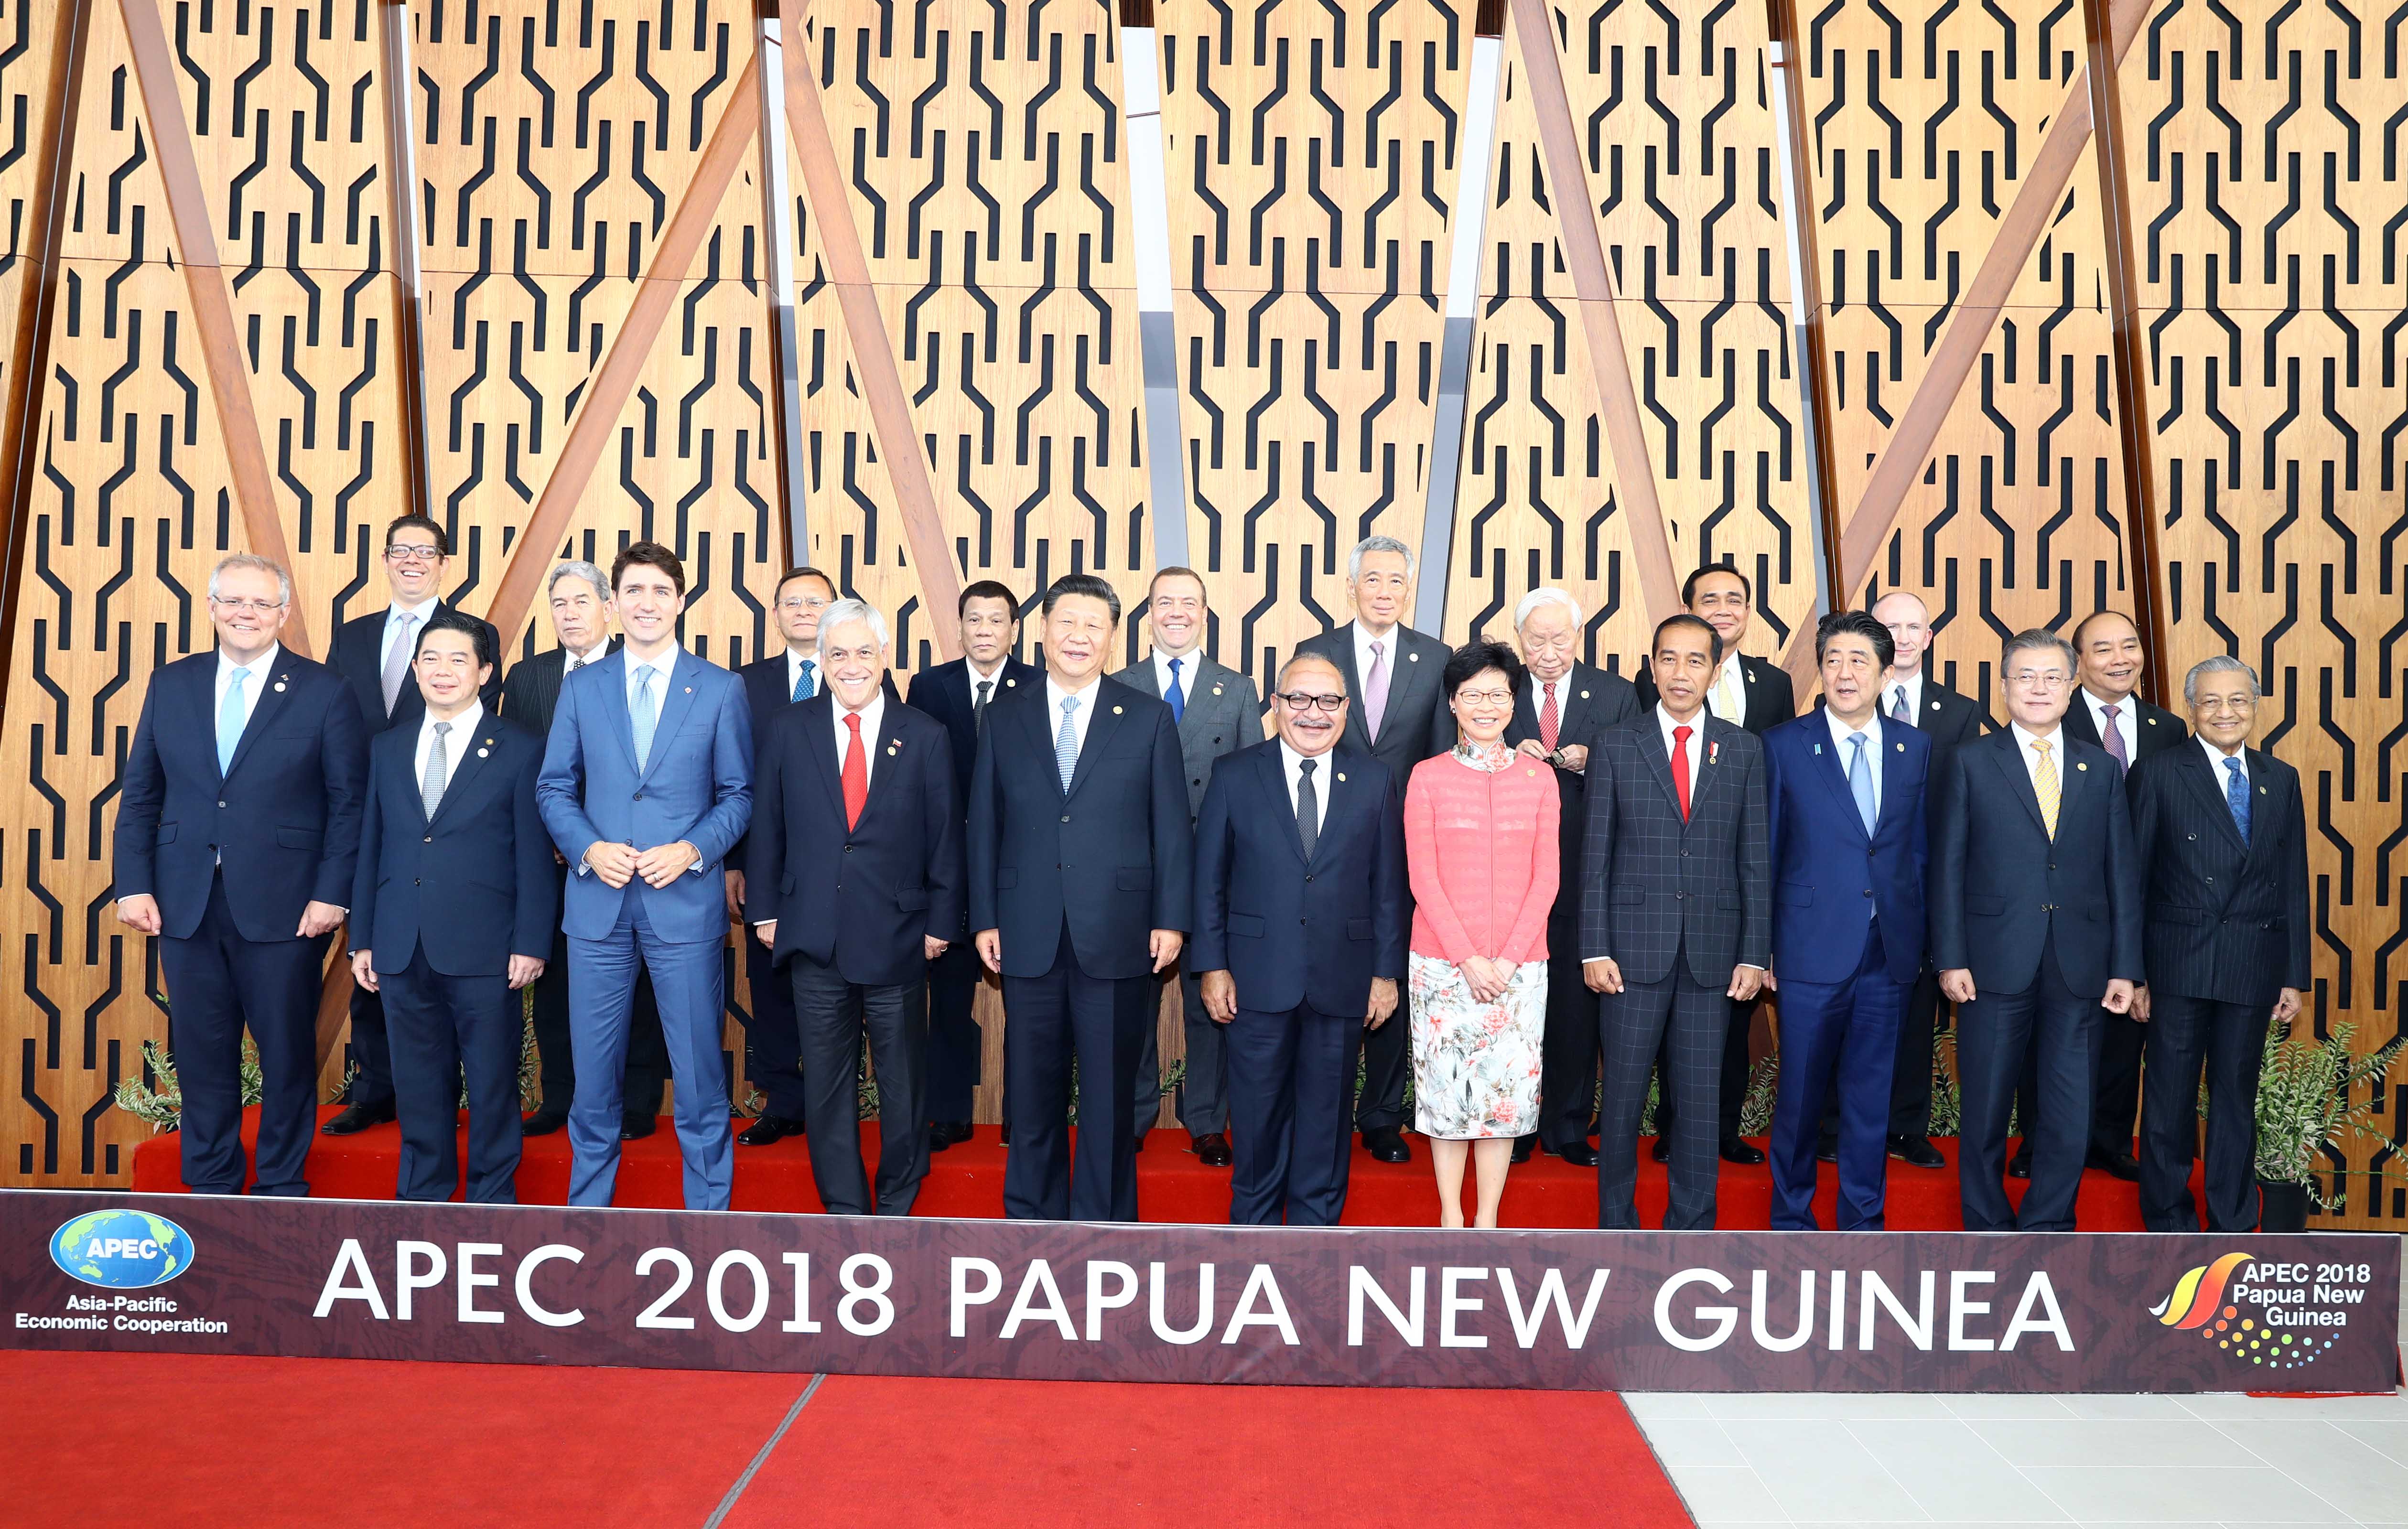 Prime Minister Nguyen Xuan Phuc embarks on APEC leaders